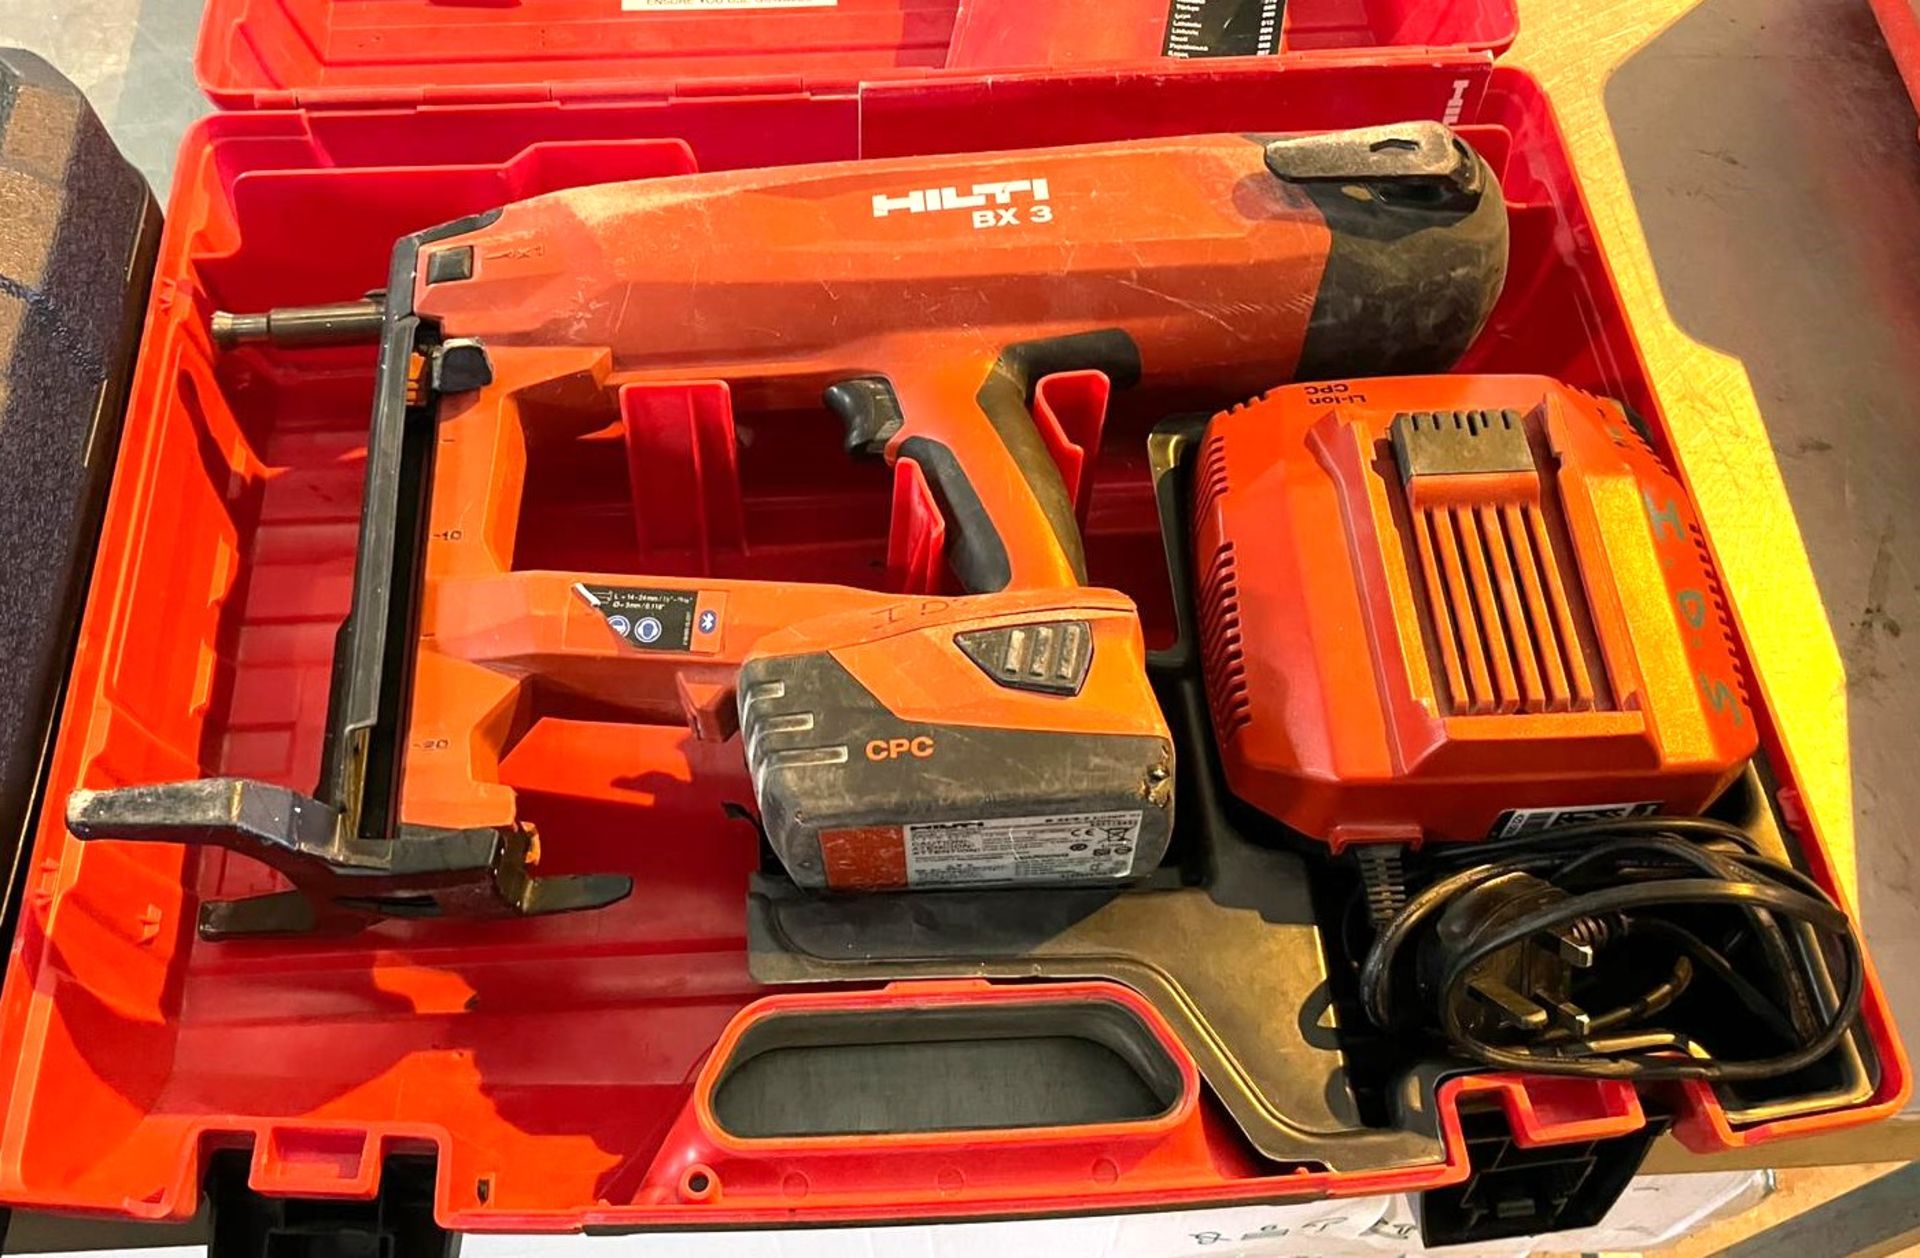 1 x Hilti BX3 Cordless Nail Gun Fastening Tool - Includes Case, Battery and Charger - RRP £3,400 - Image 6 of 7